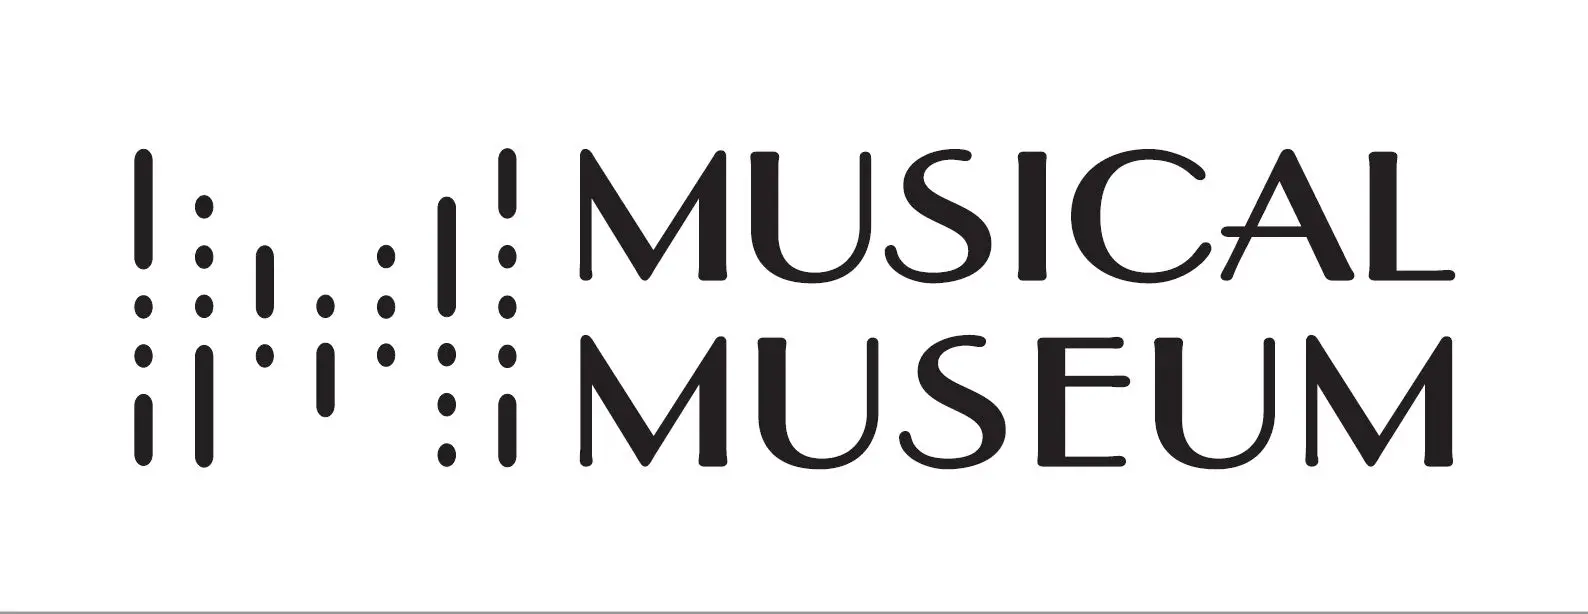 The Musical Museum